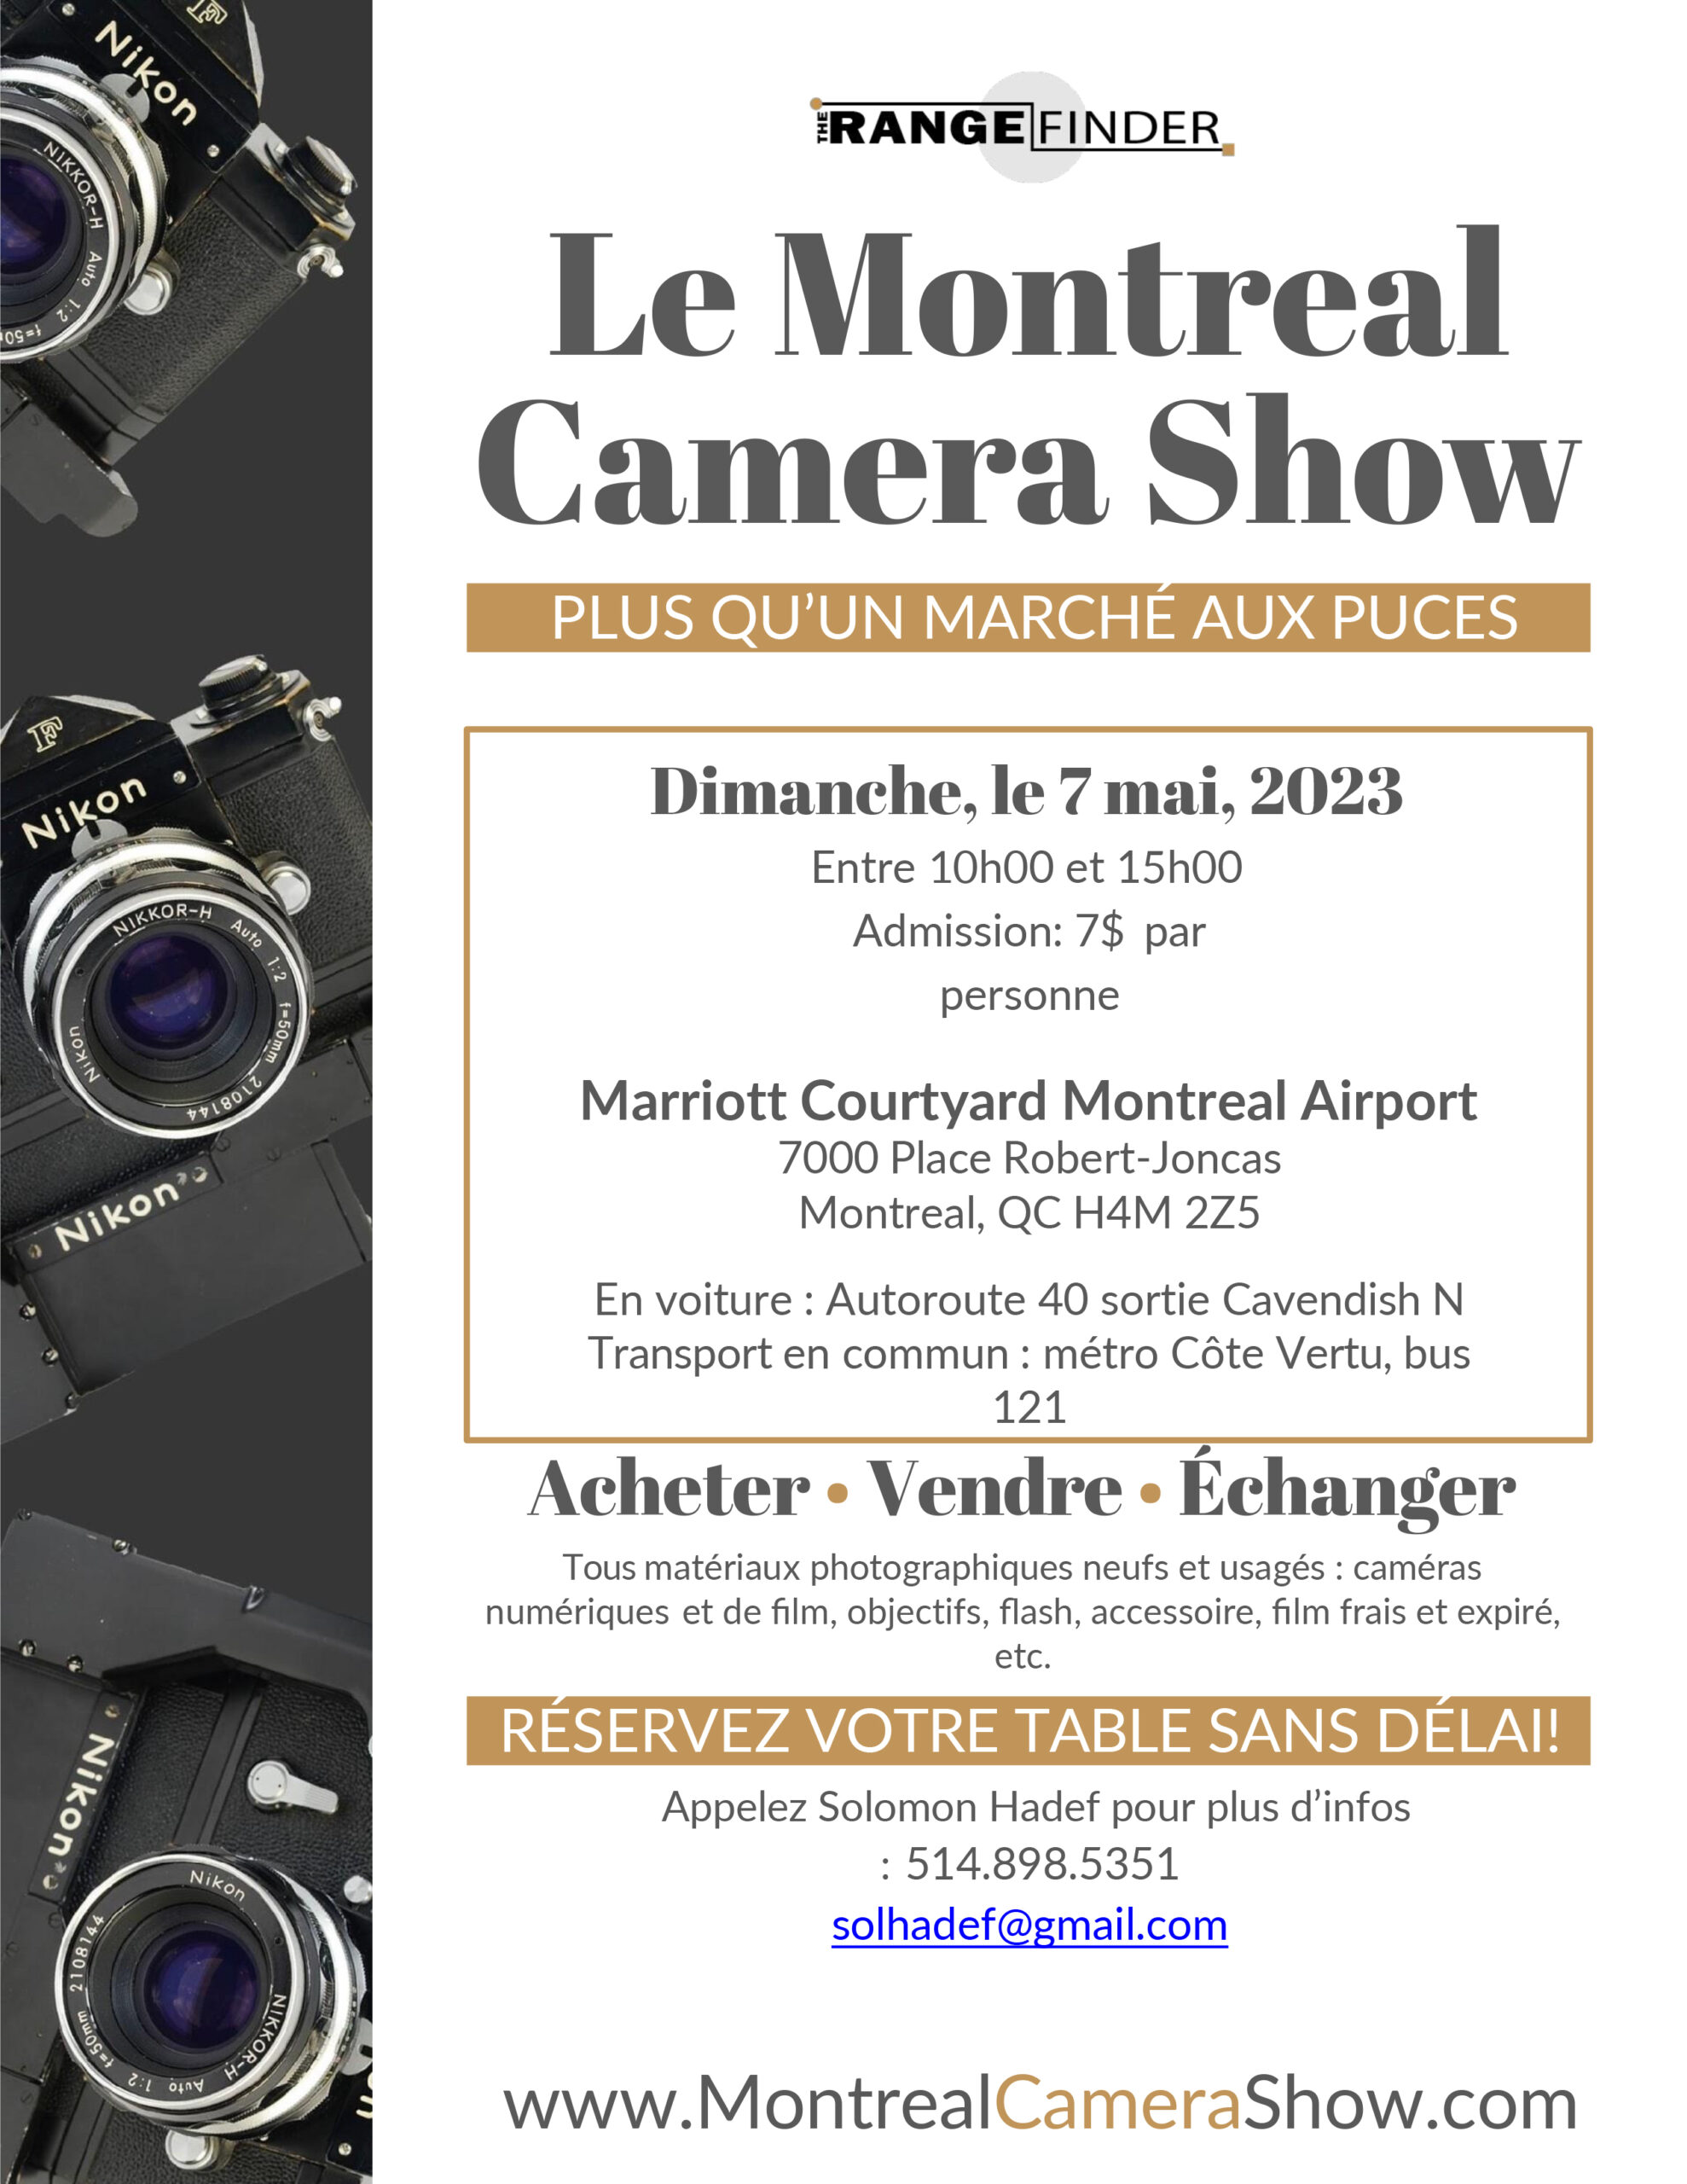 The Montreal Camera Show Flyer-french